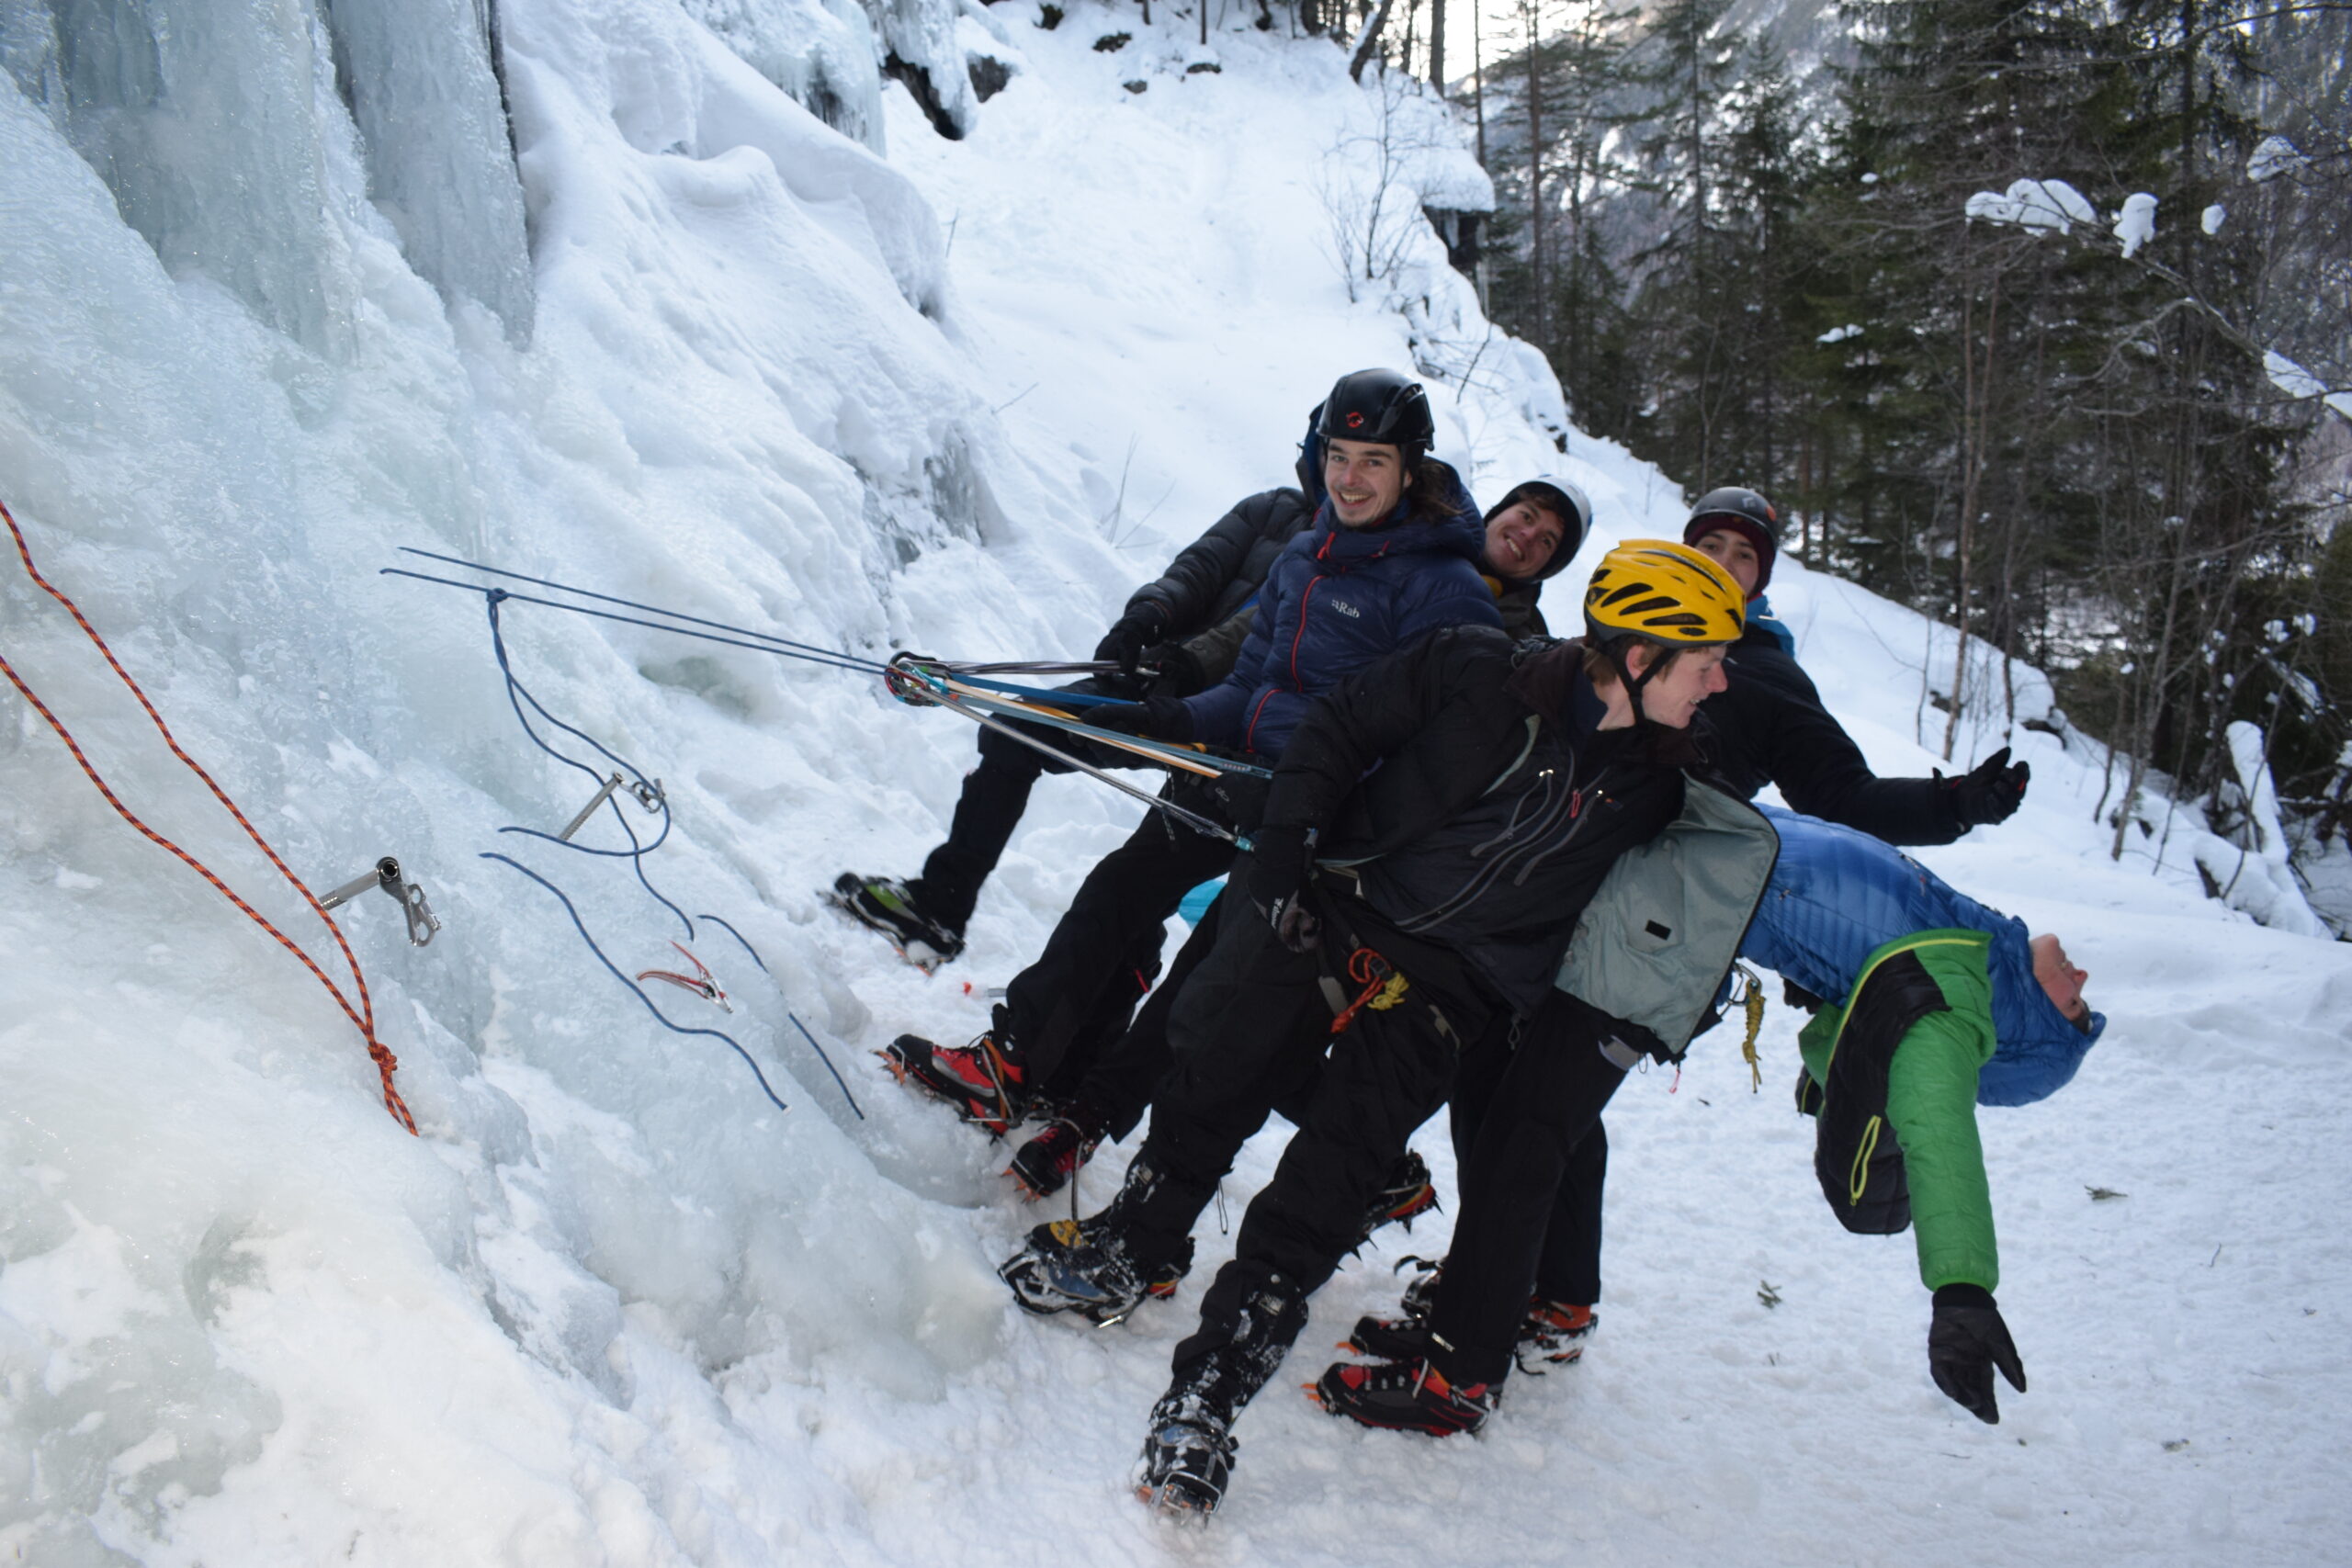 A group of people using winter climbing gear at an icy cliff